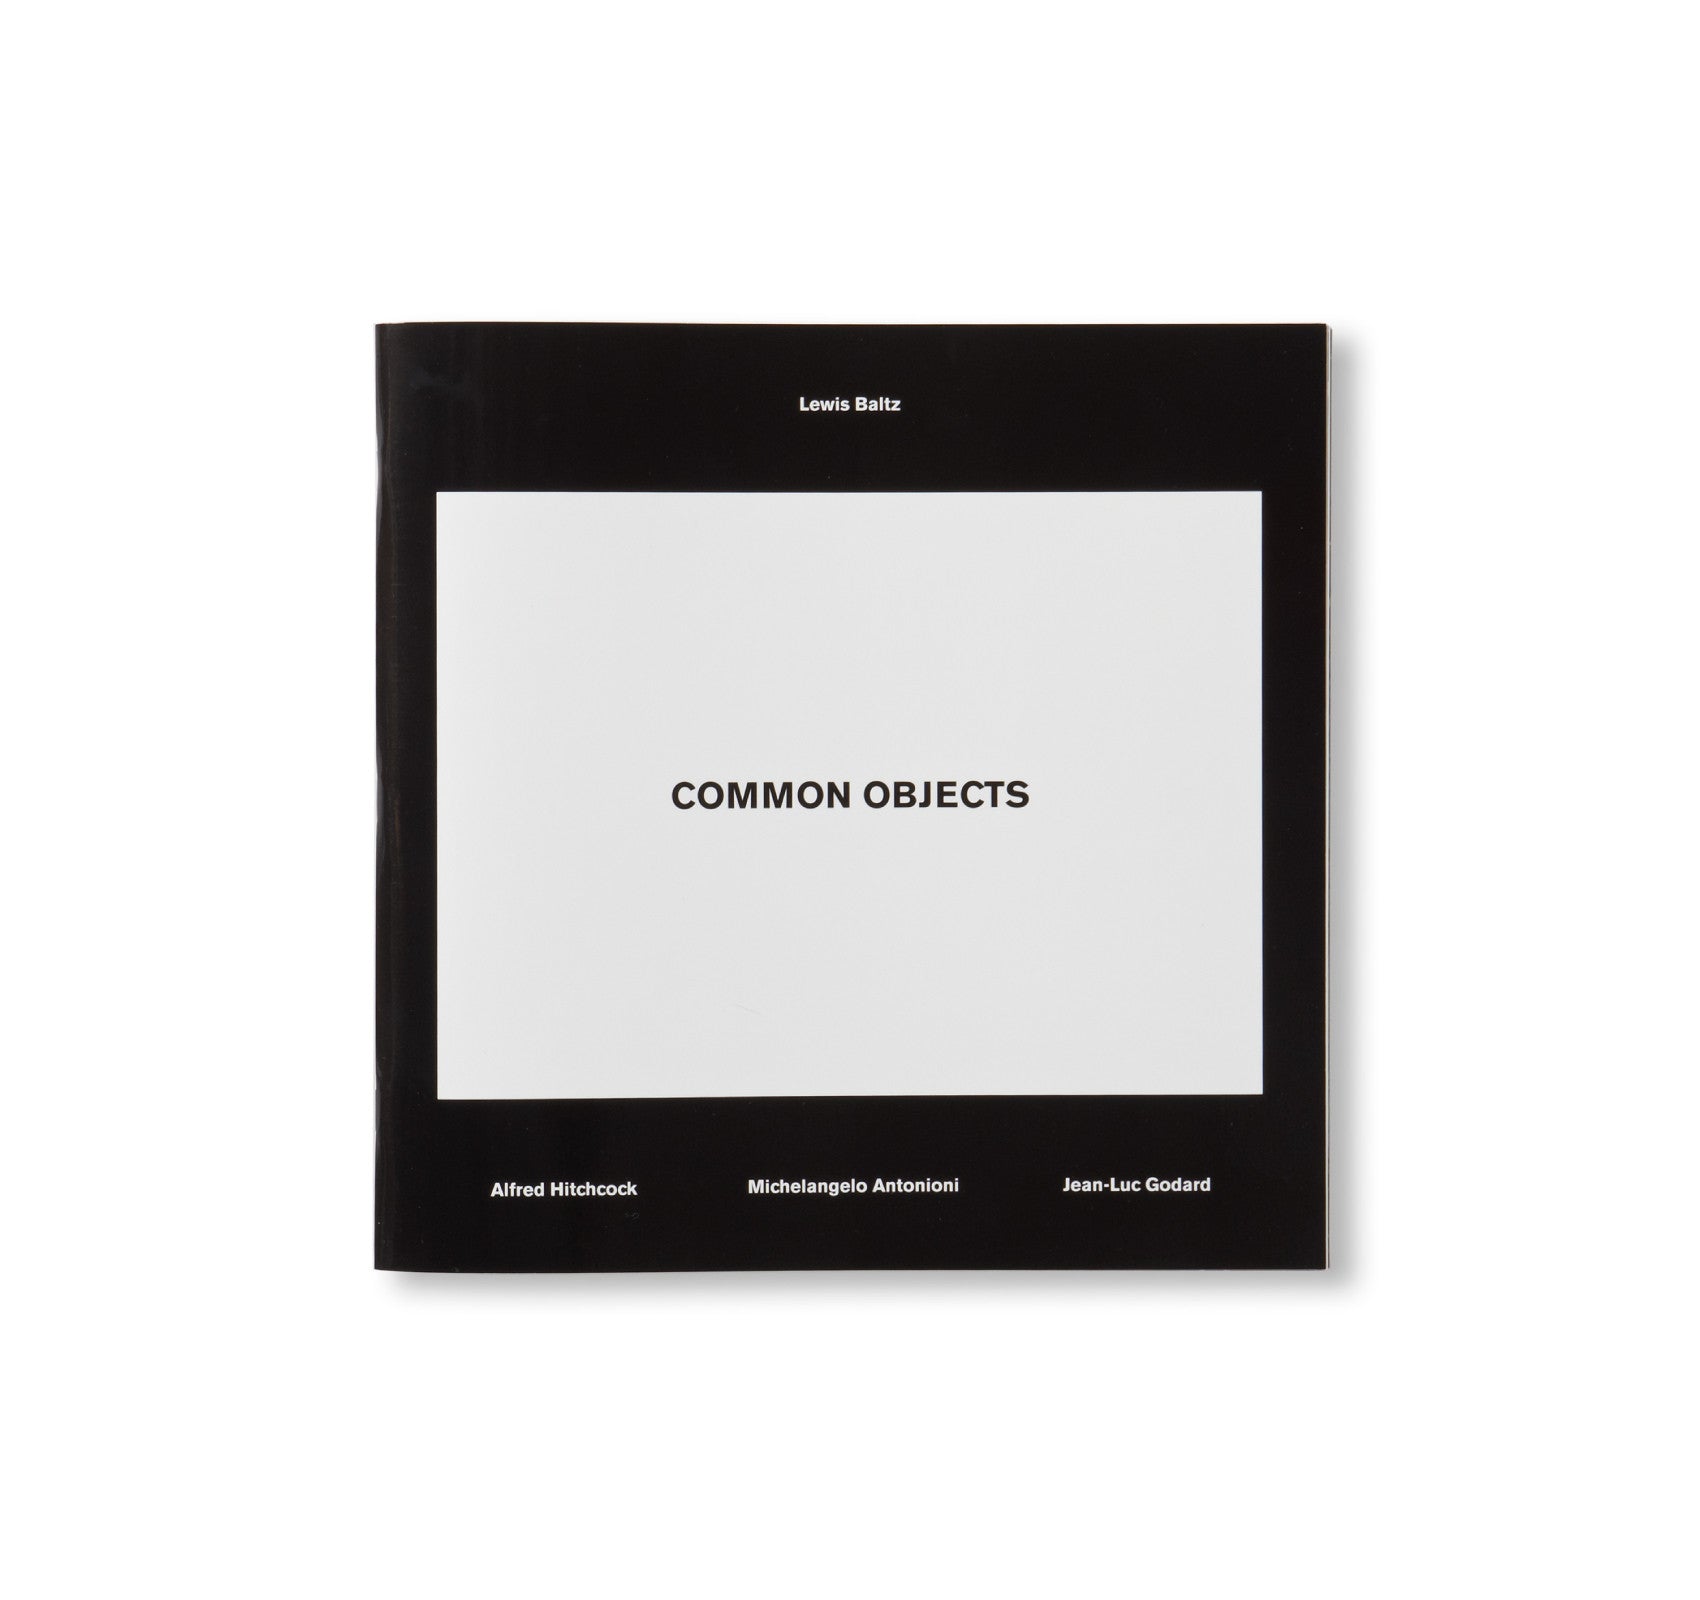 COMMON OBJECTS by Lewis Baltz